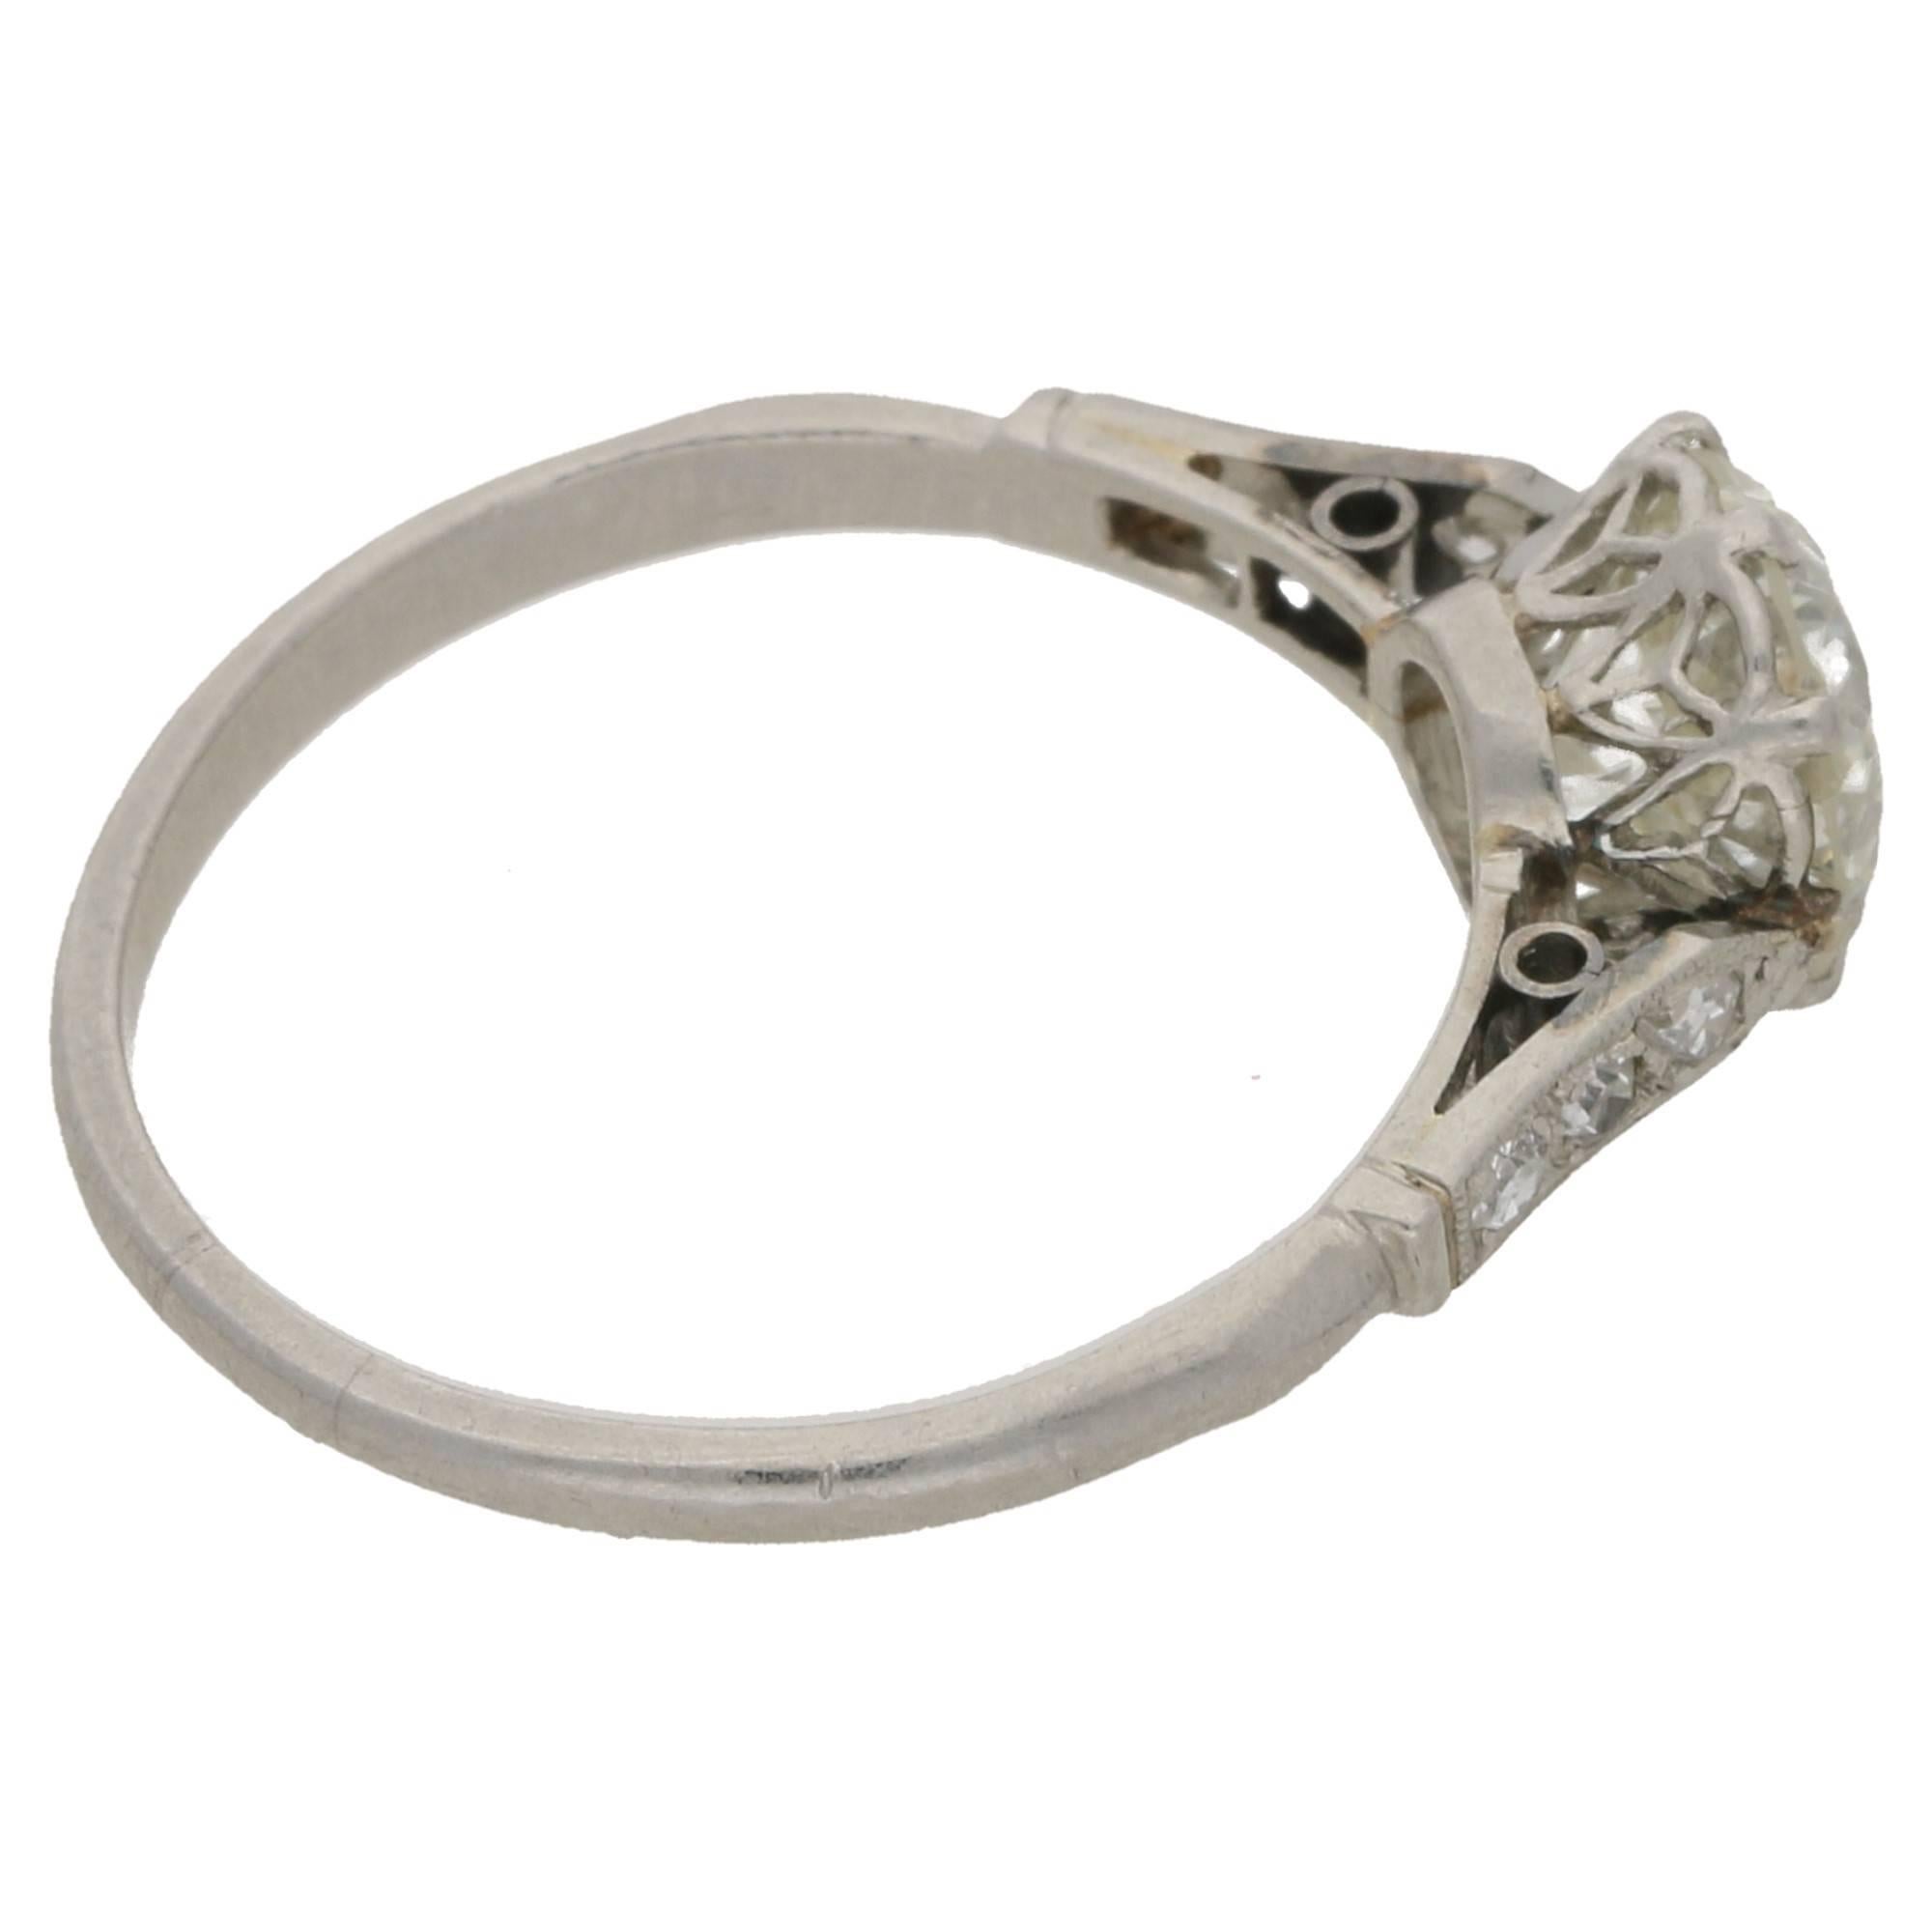 A delightful Edwardian platinum ring set with an Old European cut diamond. The diamond is eight-claw set in platinum and has pinched shoulders channel and grain set, with eight cut diamonds. The ring has an exquisite Gothic style pierced openwork